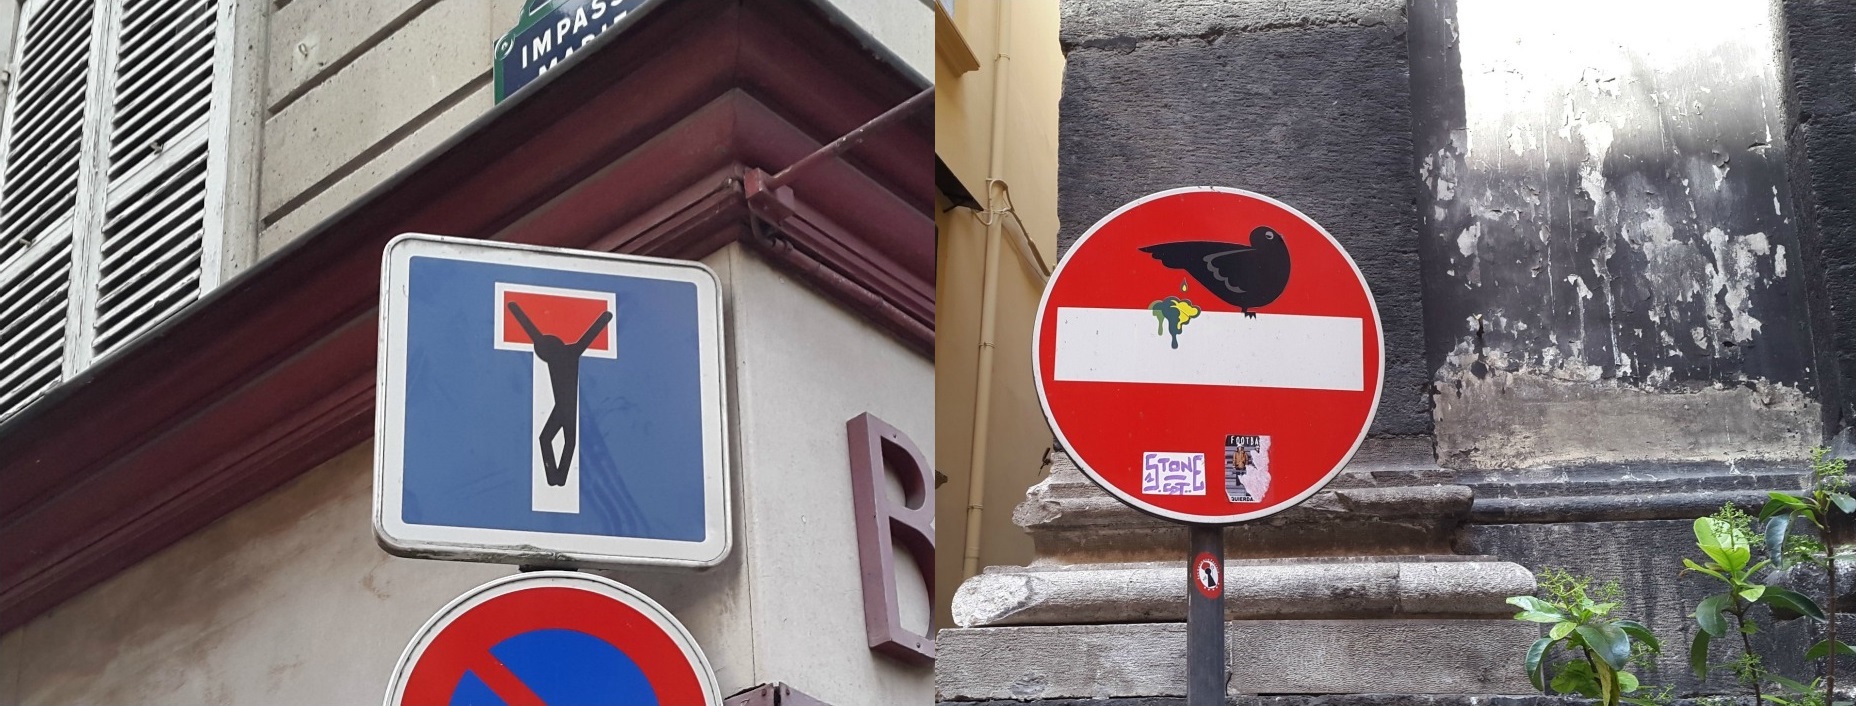 Street Sign Art From Paris to Japan By Clet Abraham